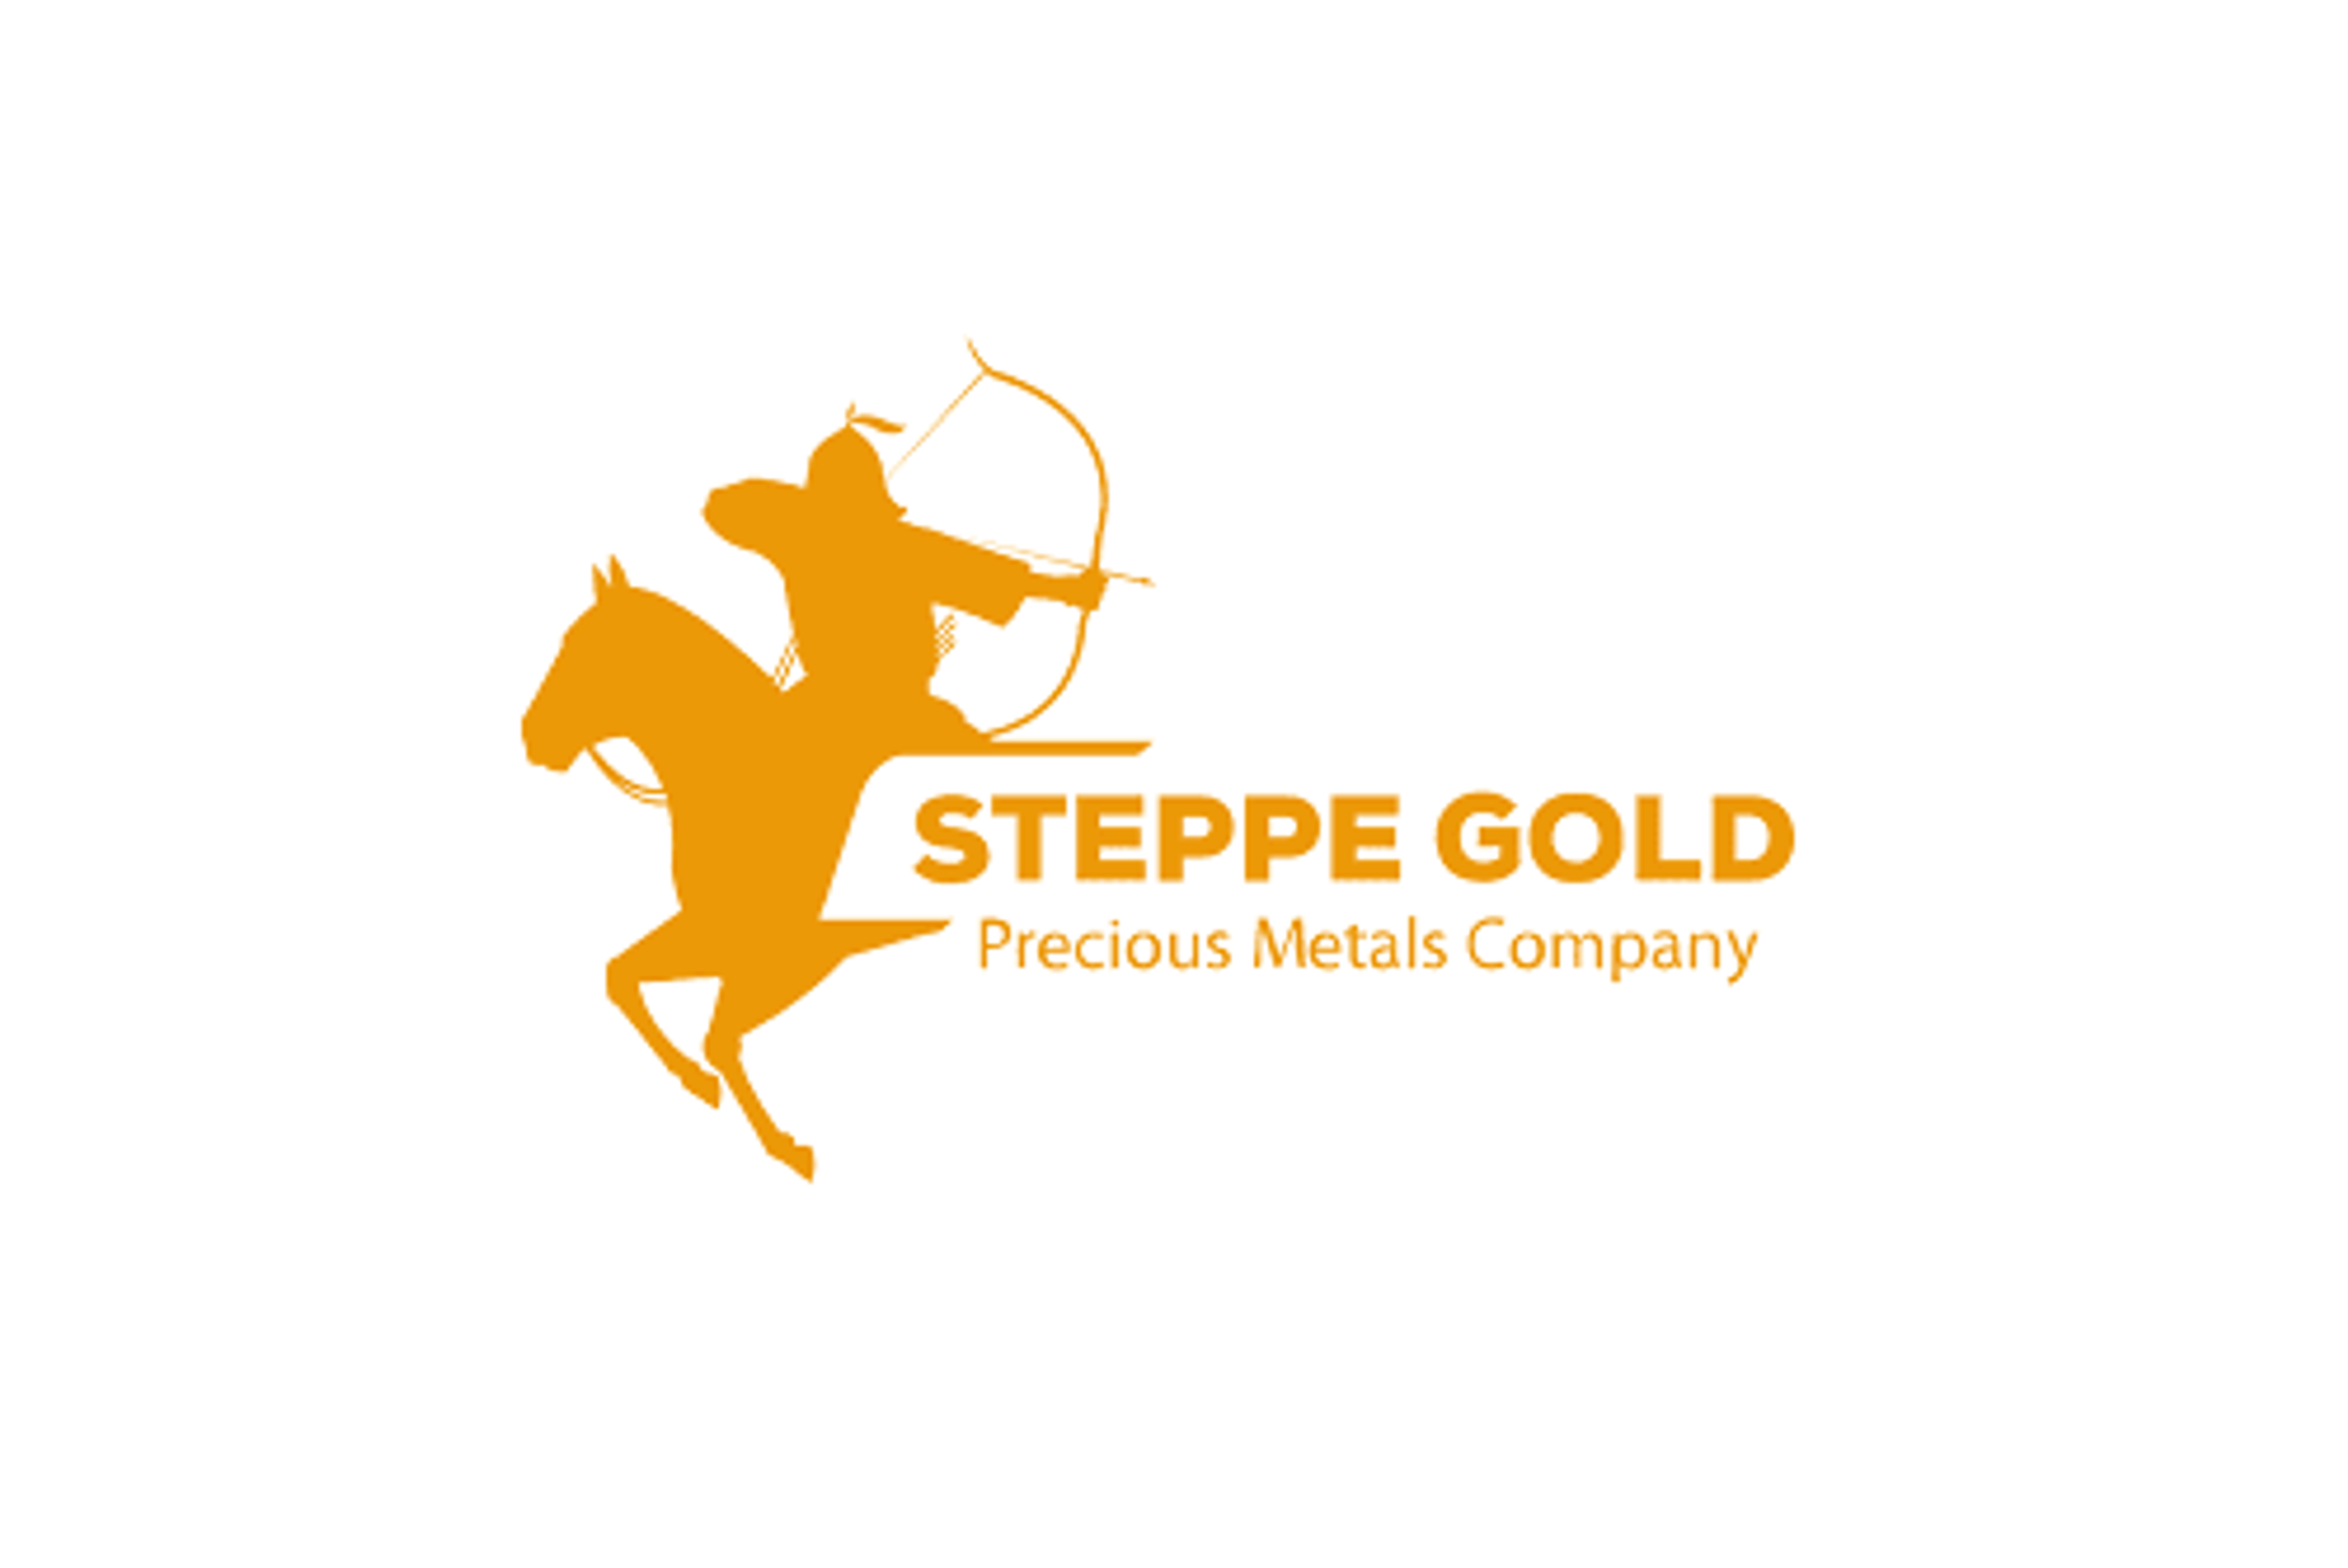 steppe gold share price